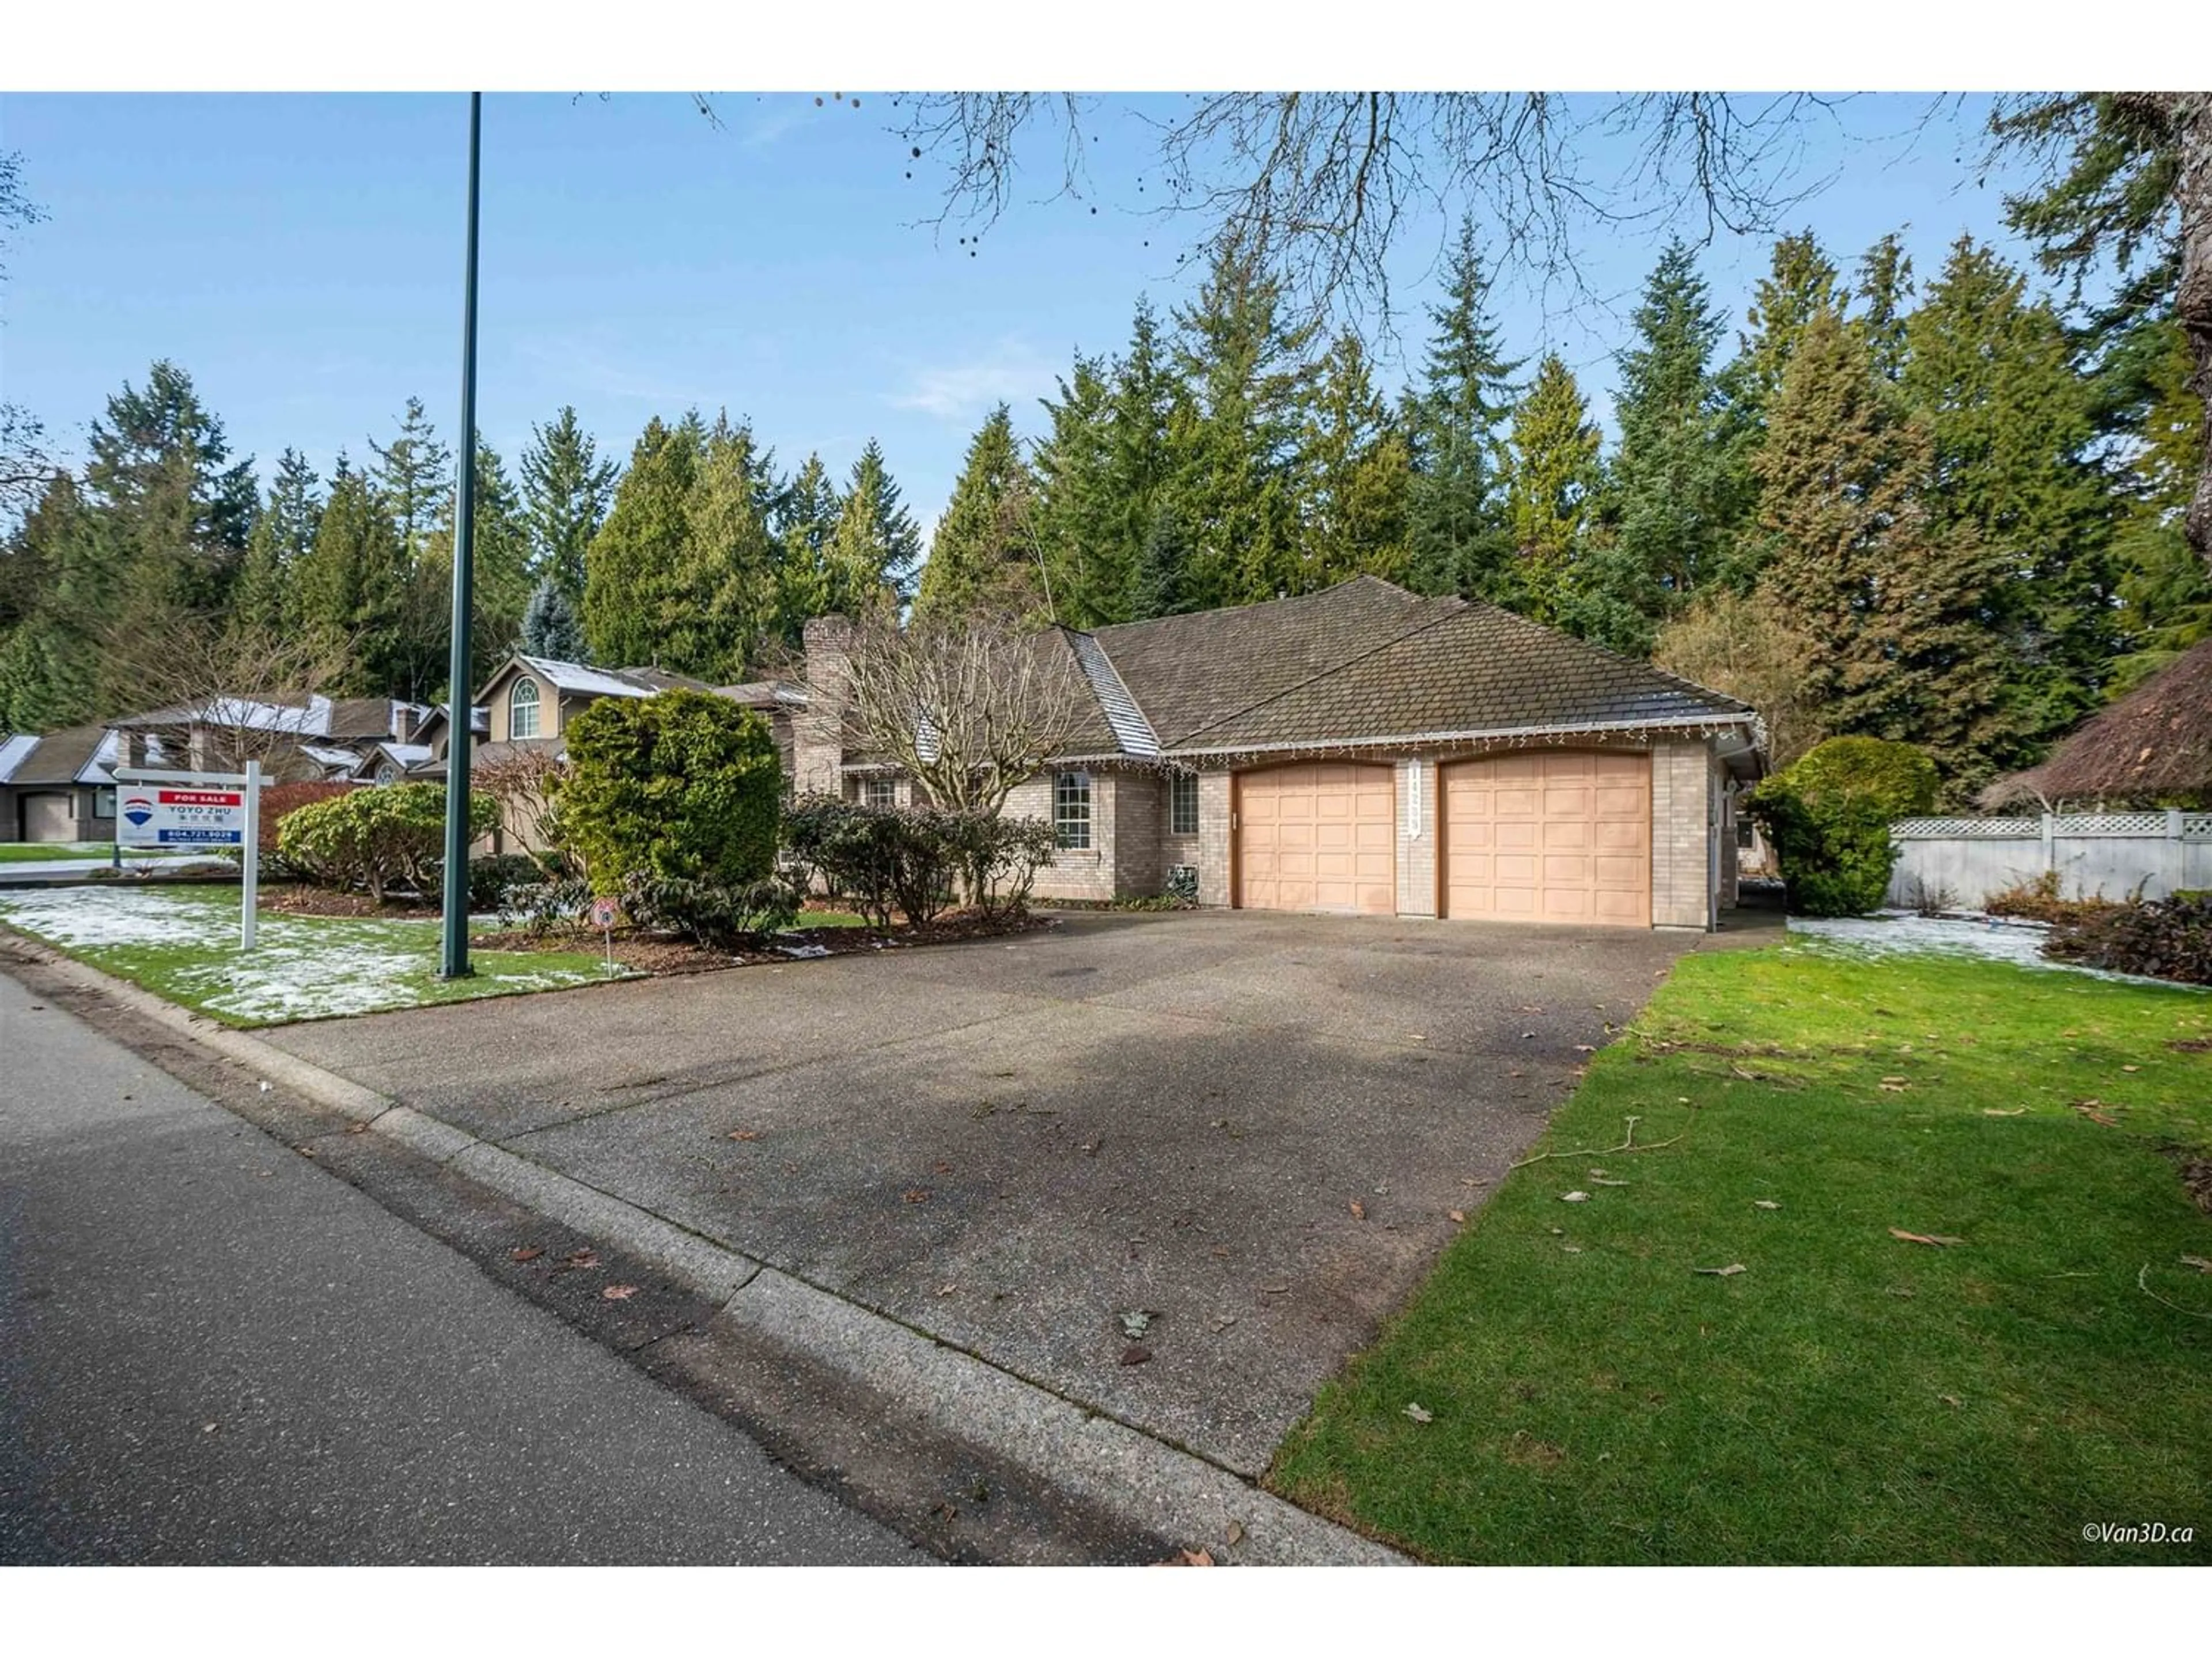 Frontside or backside of a home for 14239 31 AVENUE, Surrey British Columbia V4P1R3